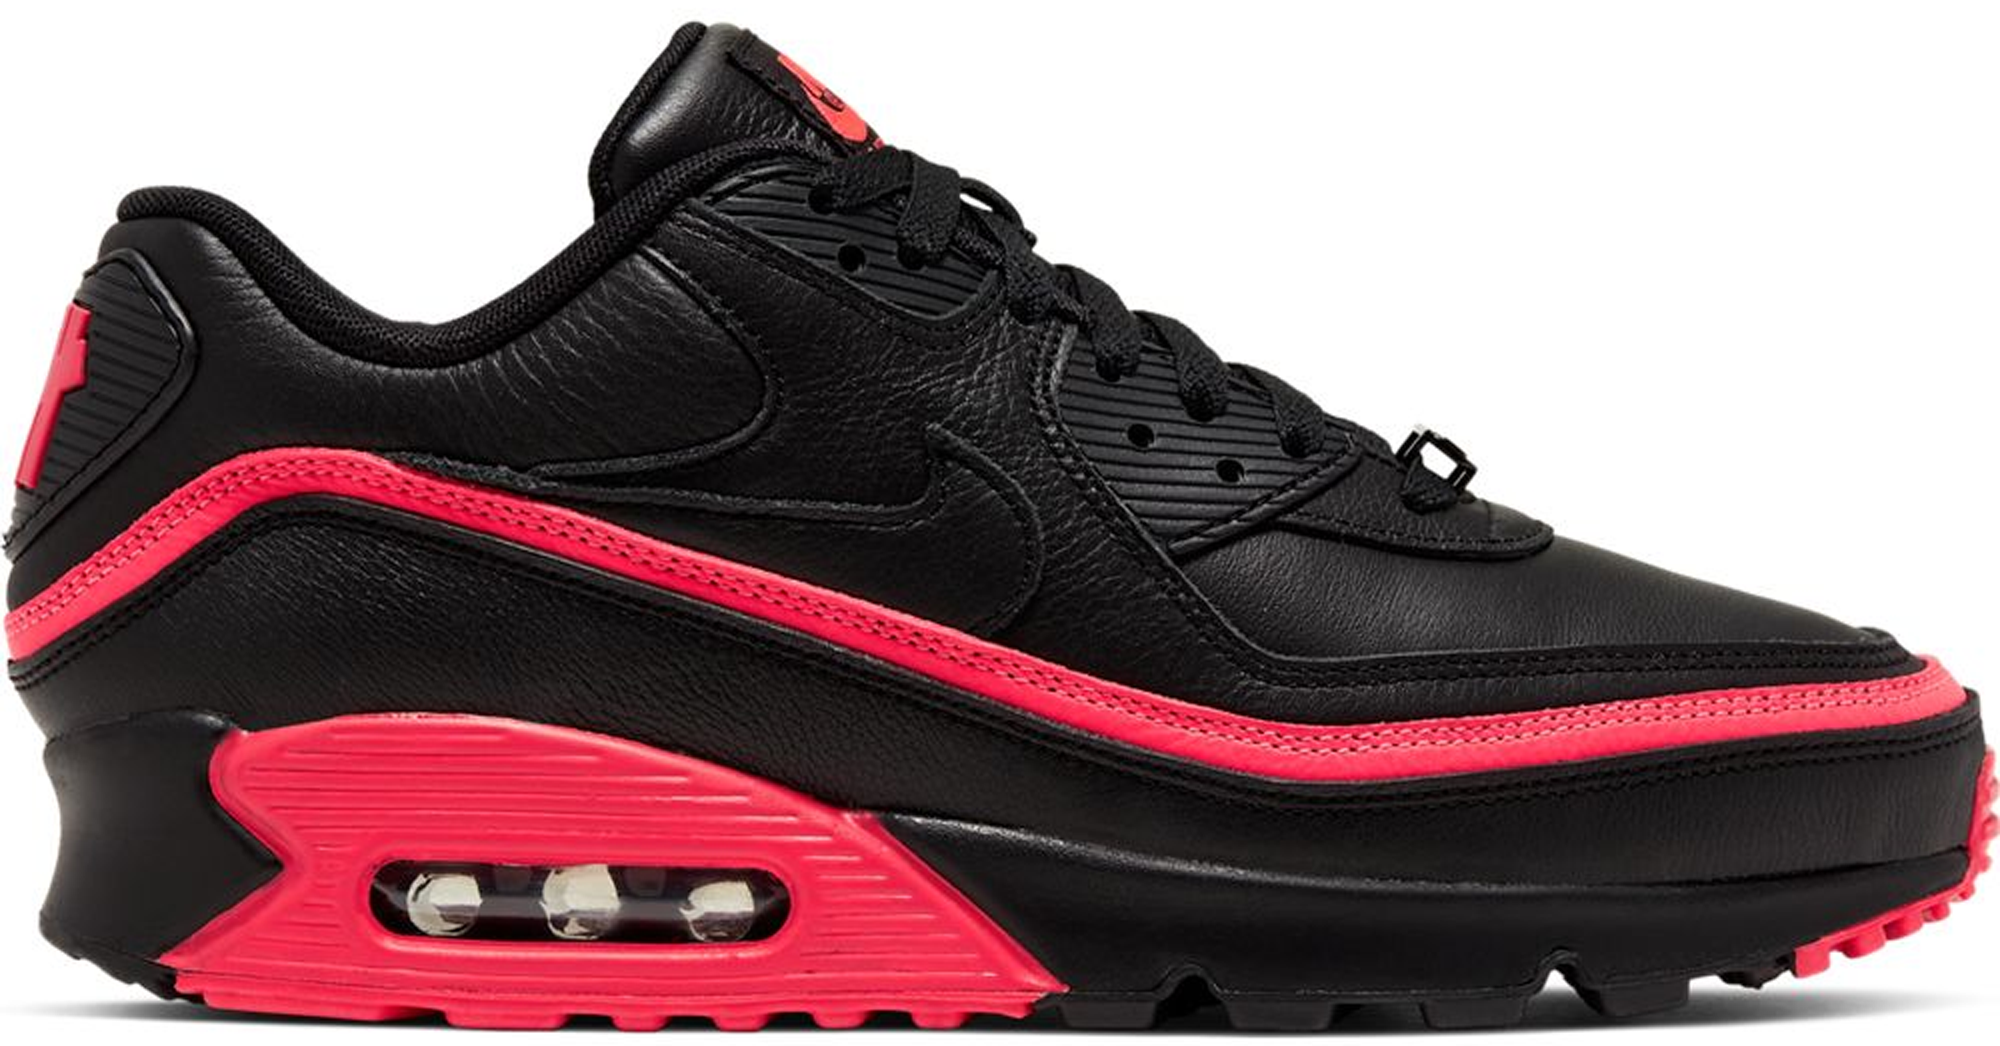 undefeated air max 90 solar red